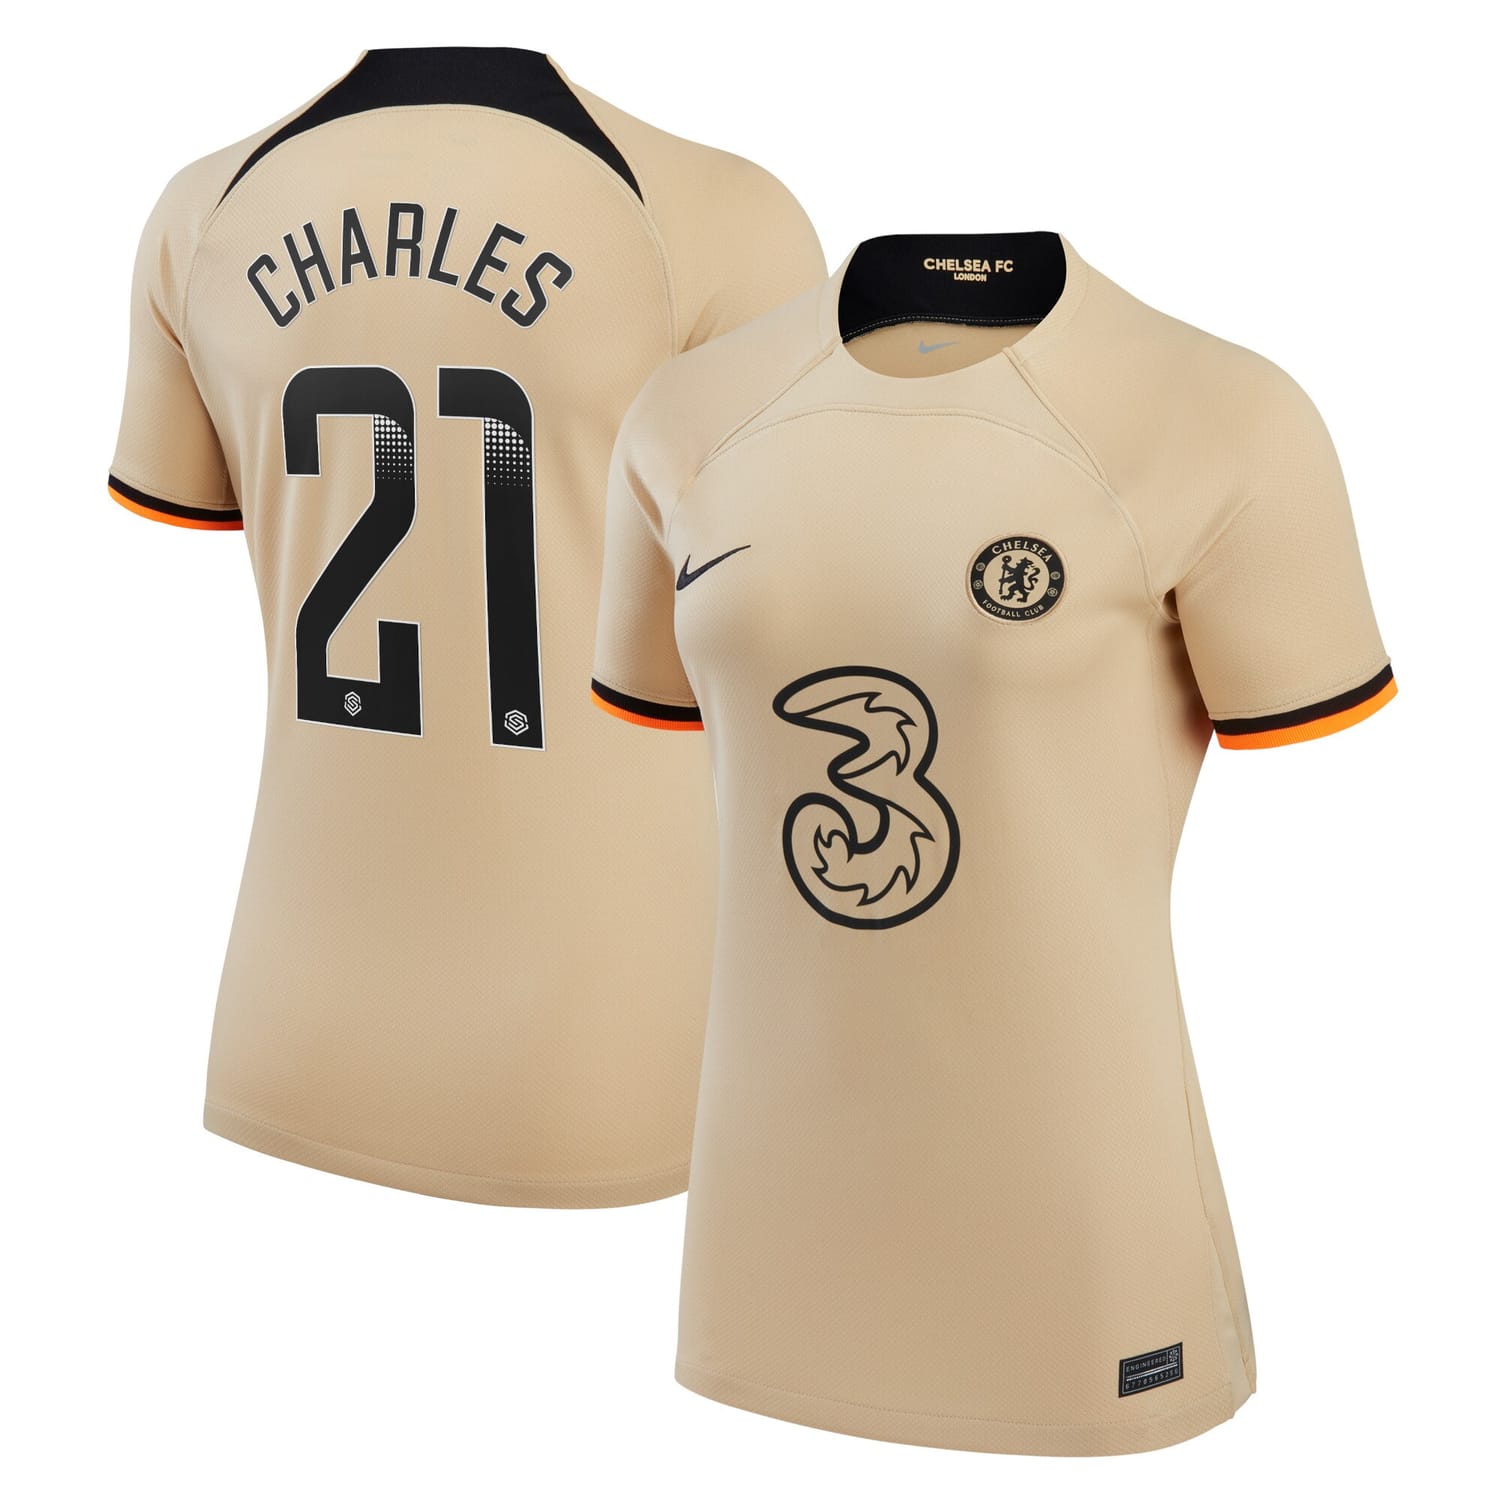 Premier League Chelsea Third WSL Jersey Shirt 2022-23 player Niamh Charles 21 printing for Women